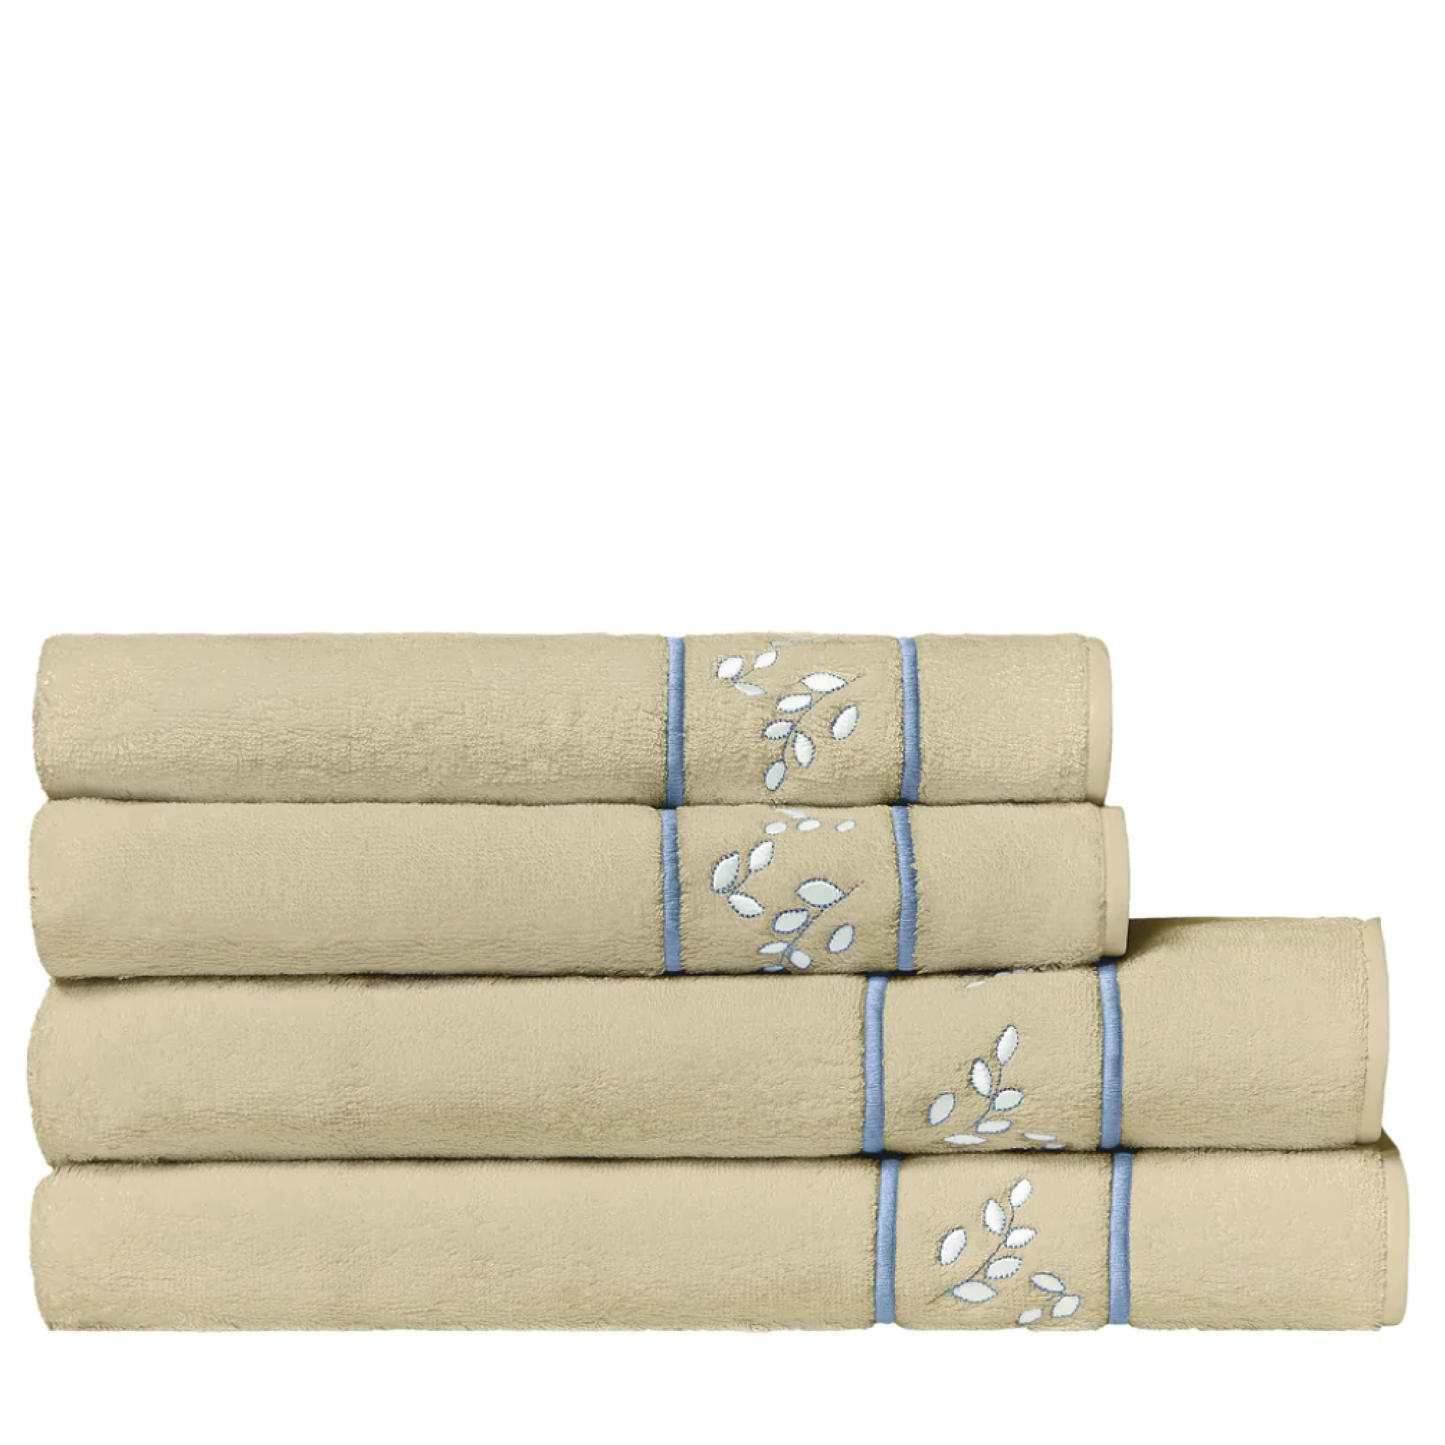 Roma Beige, White and Gray Towels